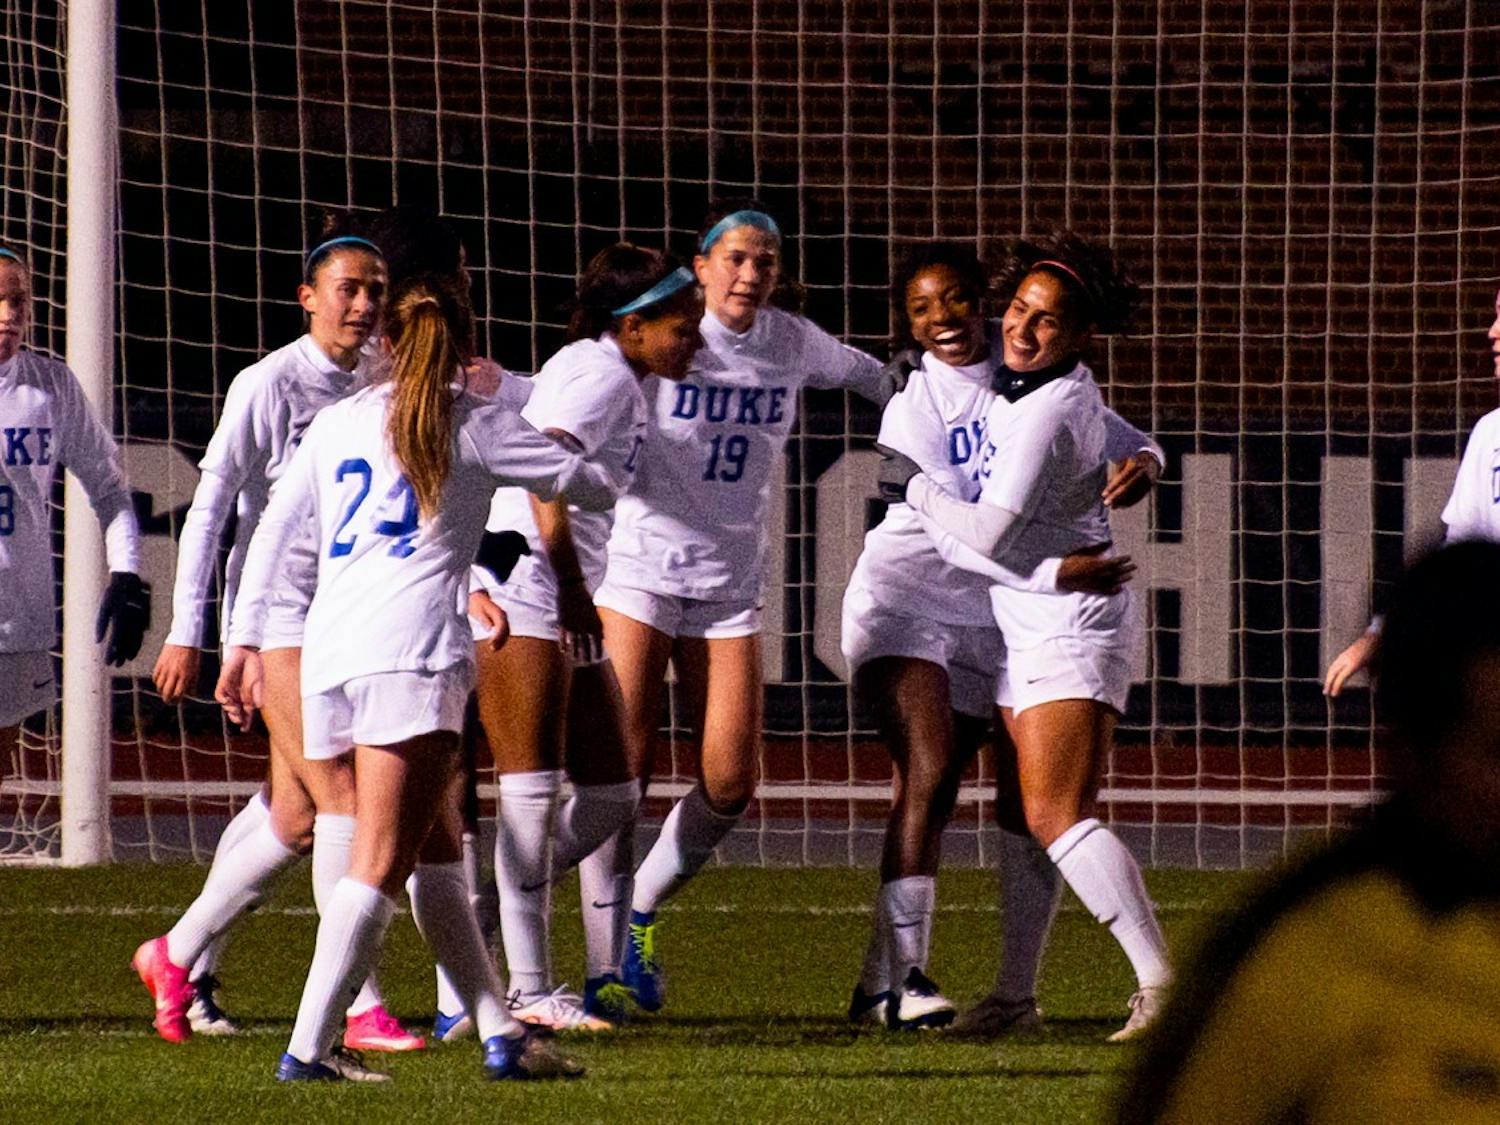 Redshirt senior wingback Mia Gyau's goal in the 61st minute was the lone score of Friday's win for Duke.